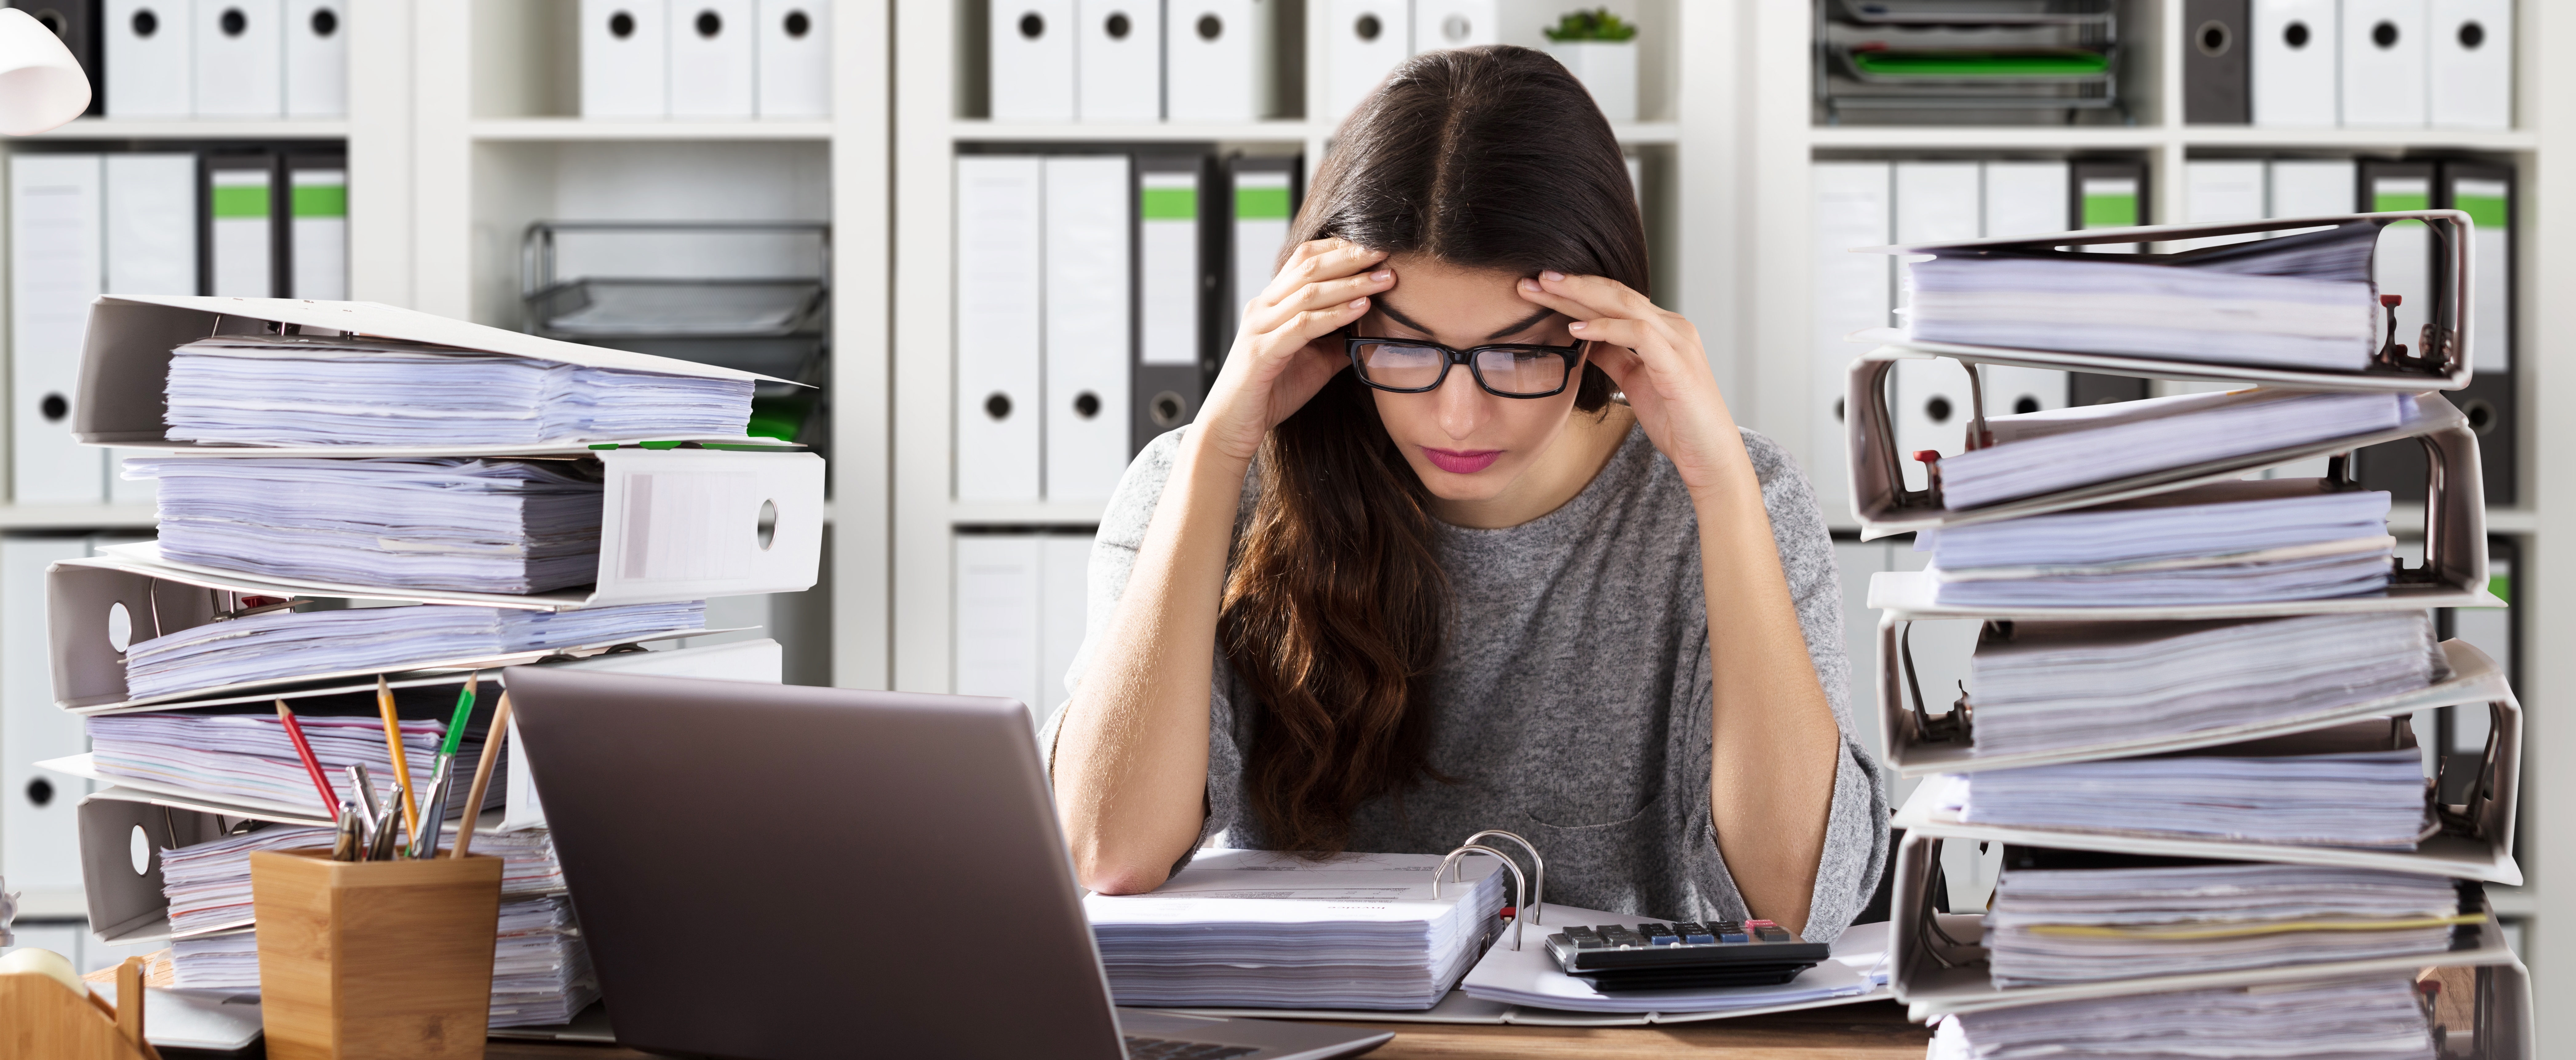 Woman looking stressed among stacks of invoices